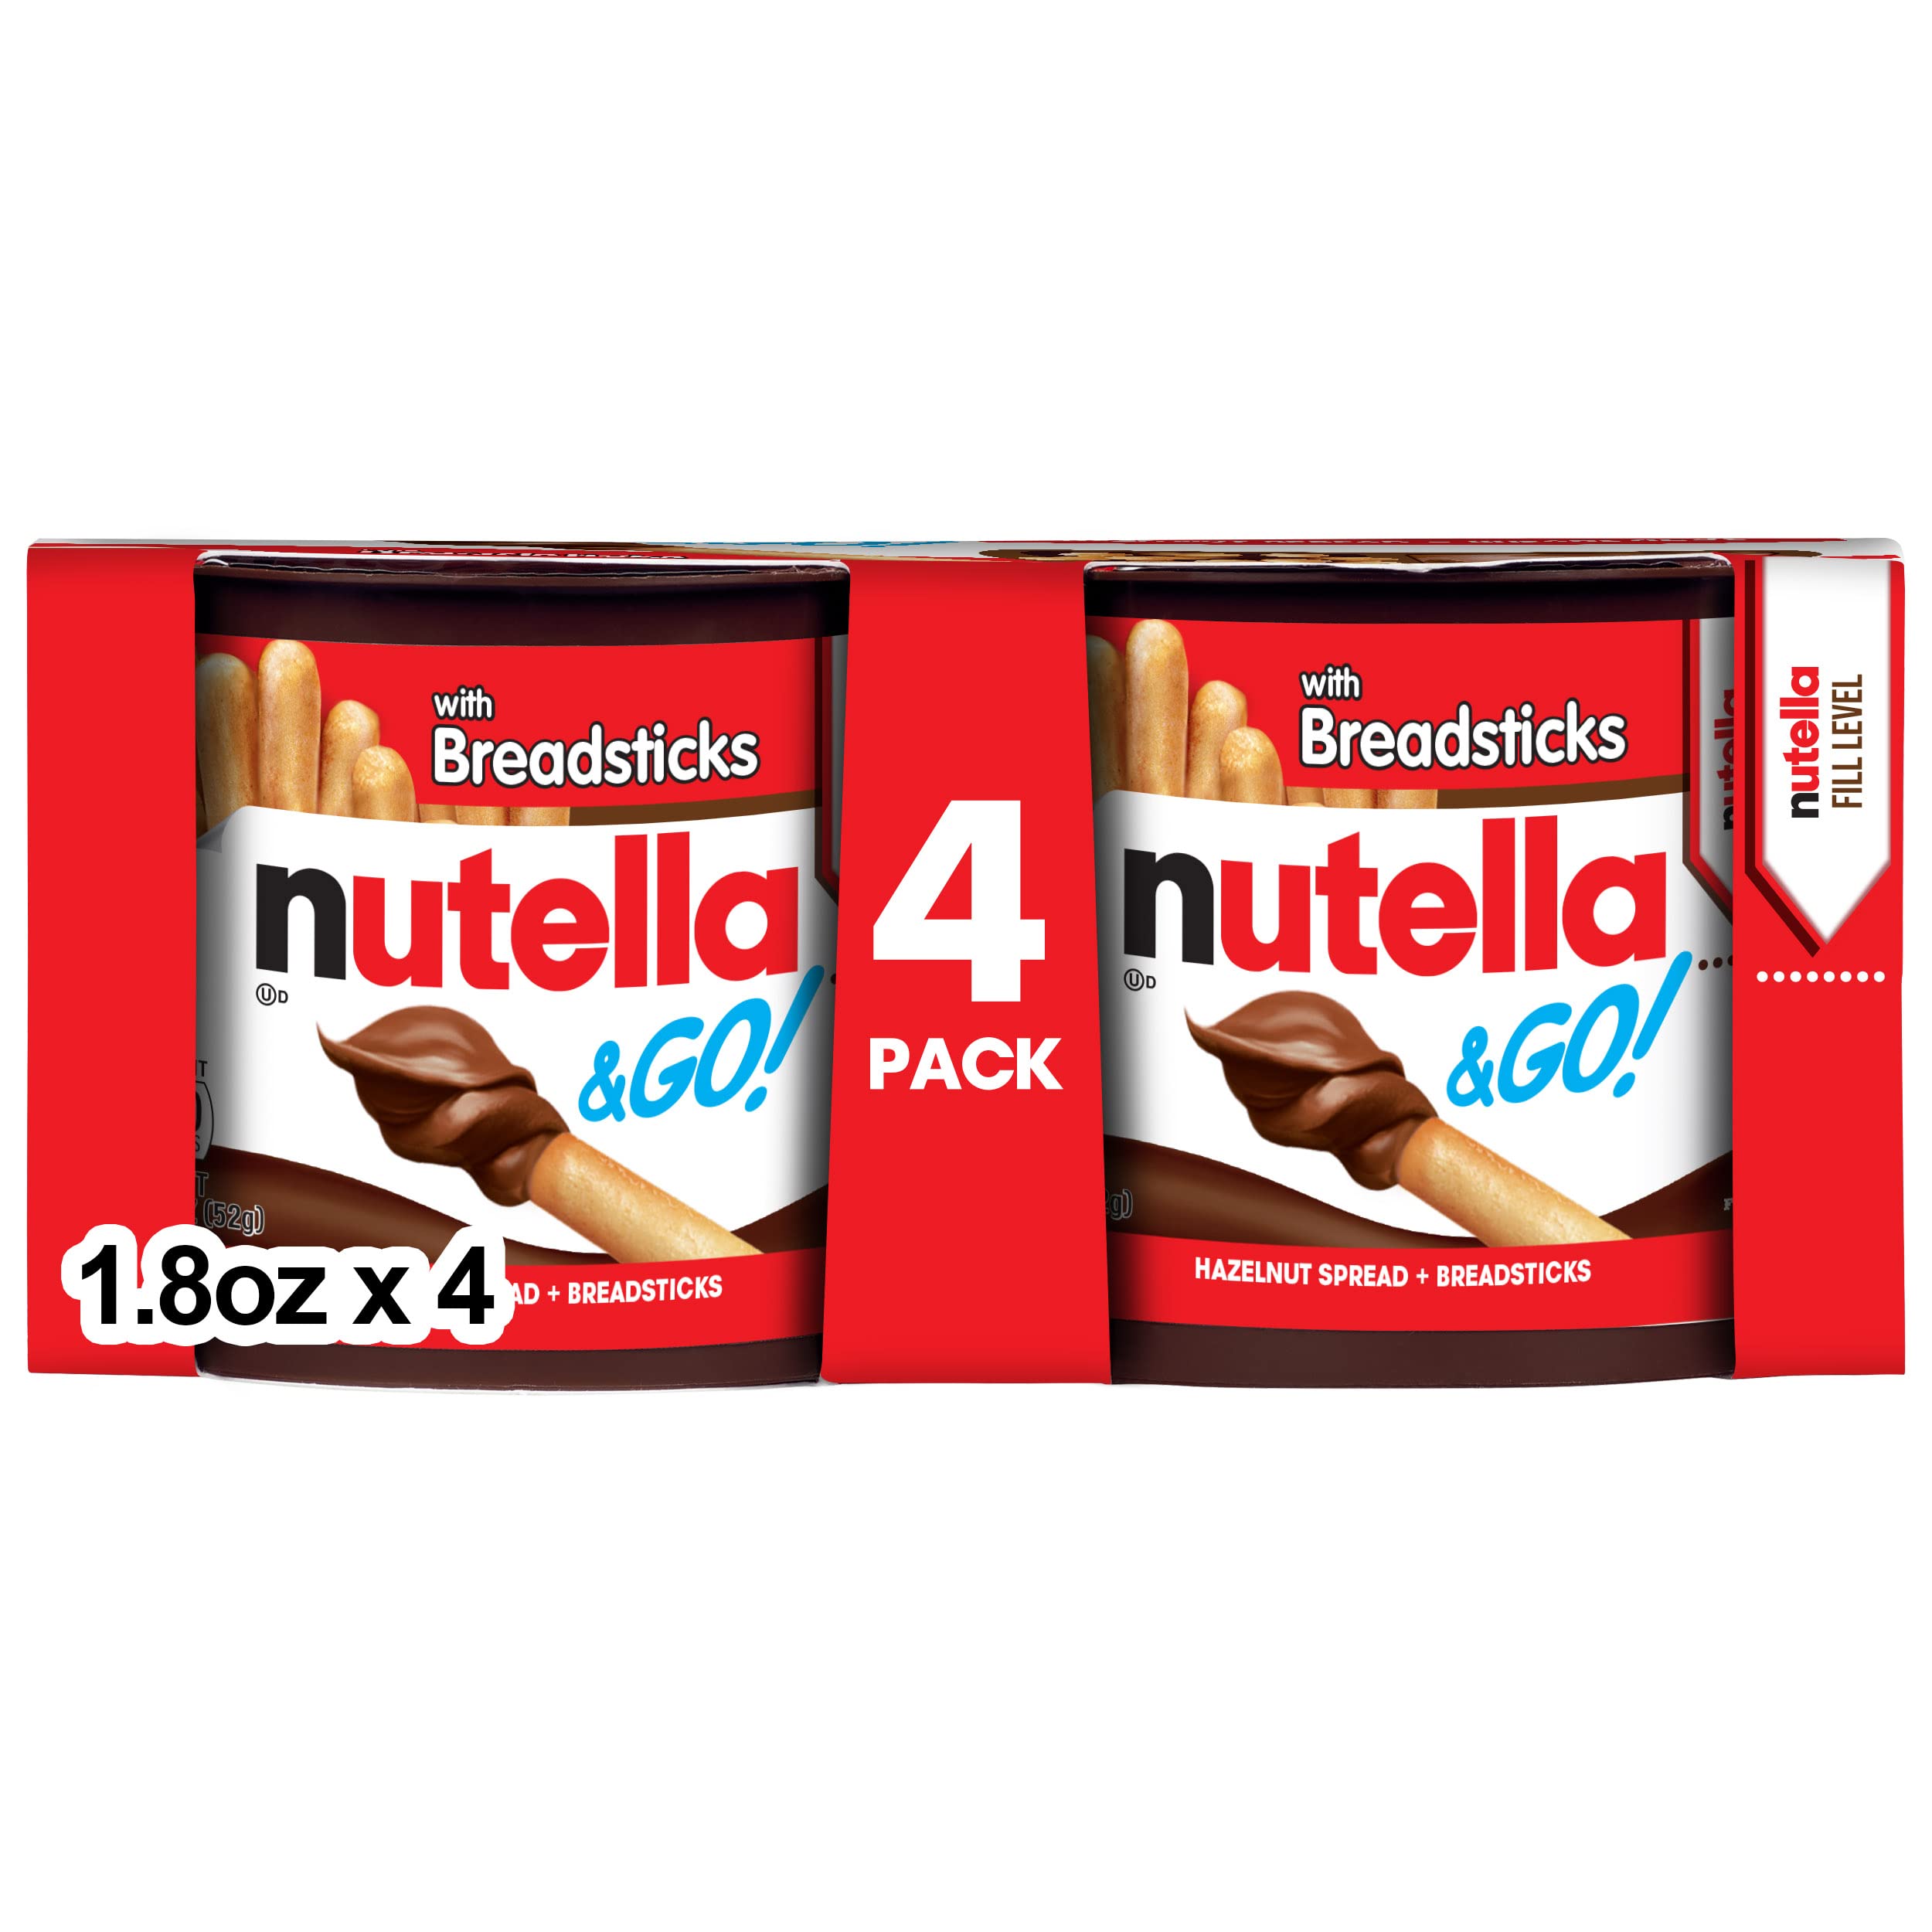 Nutella & GO! 4 Pack, Hazelnut And Cocoa Spread With Breadsticks, Snack Cups, 1.9 Oz Each [Subscribe & Save] $4.52